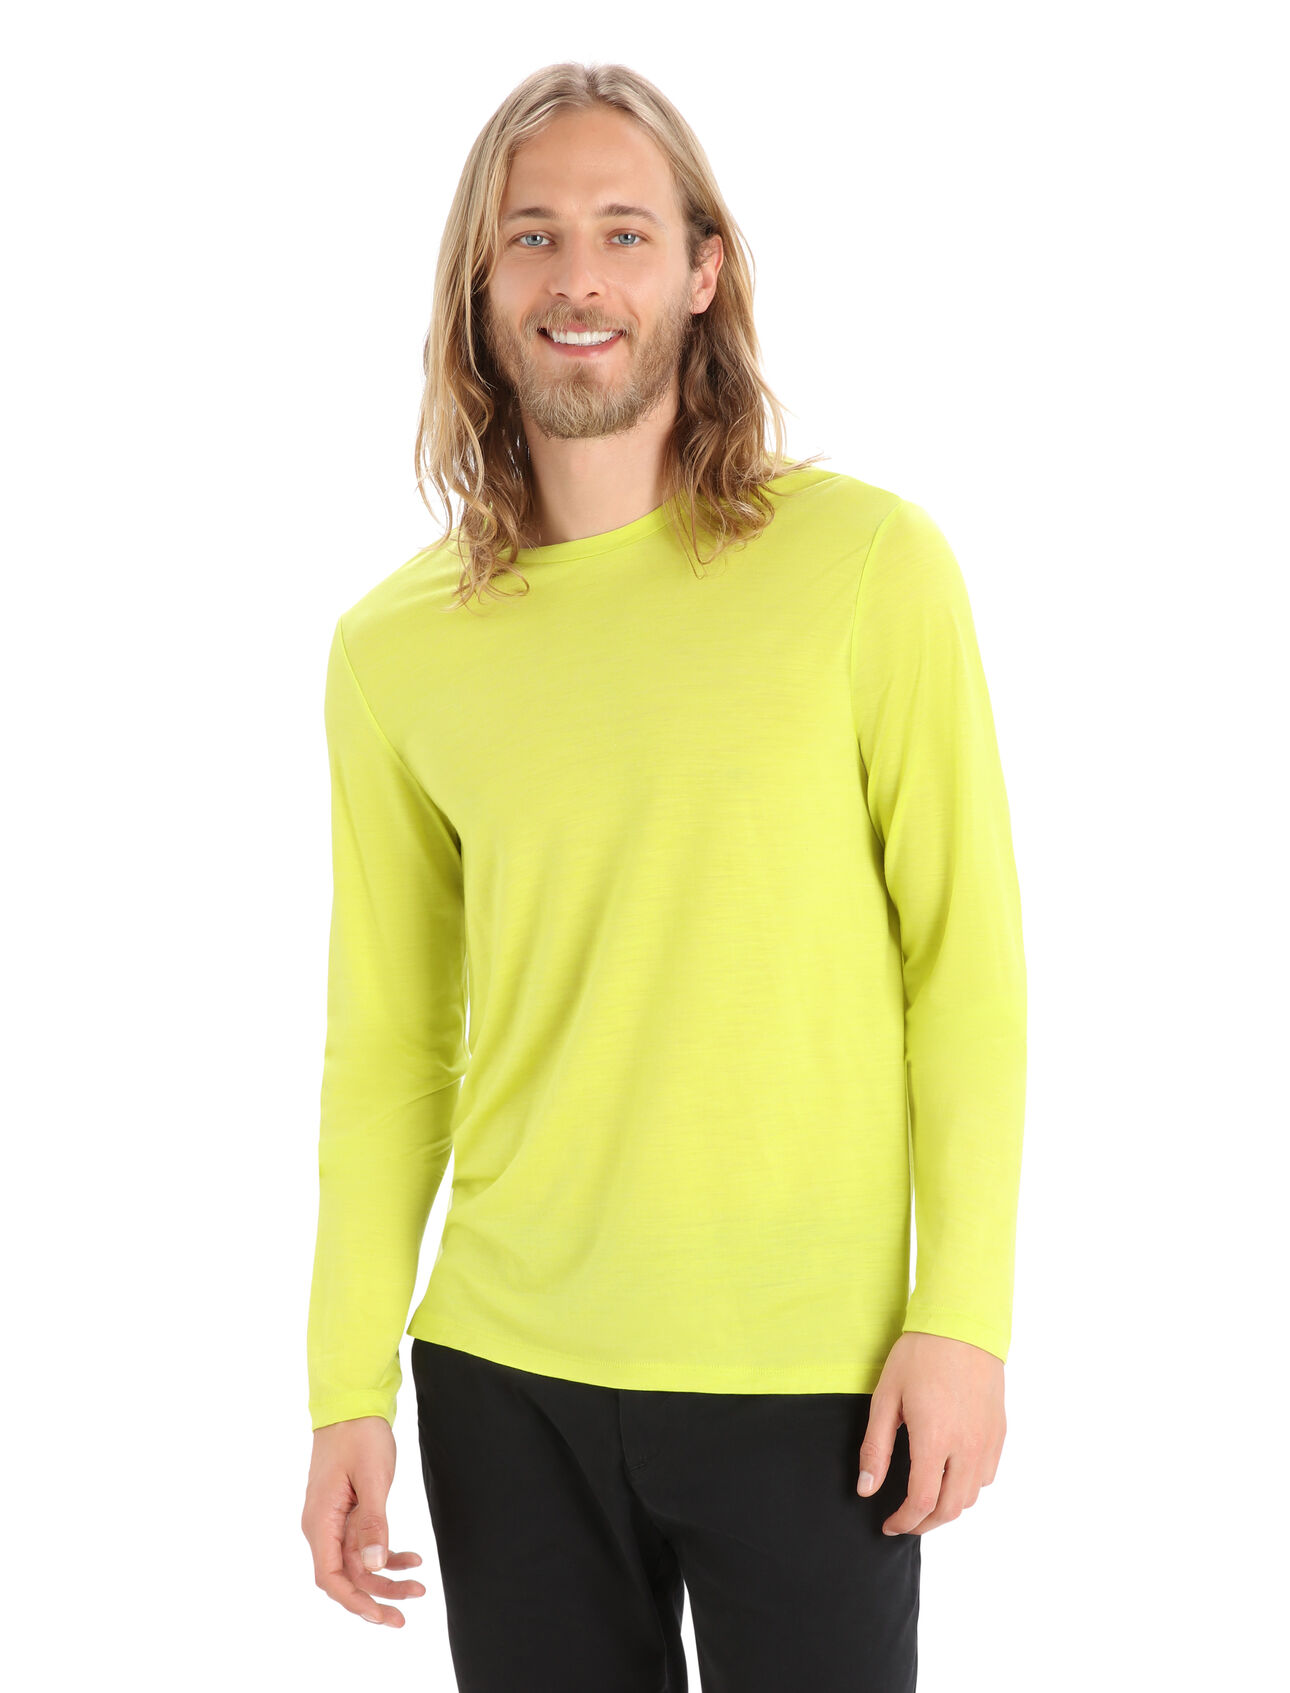 Mens Merino Sphere II Long Sleeve T-Shirt A soft merino-blend tee made with our lightweight Cool-Lite™ jersey fabric, the Sphere II Long Sleeve Tee provides natural breathability, odor resistance and comfort.